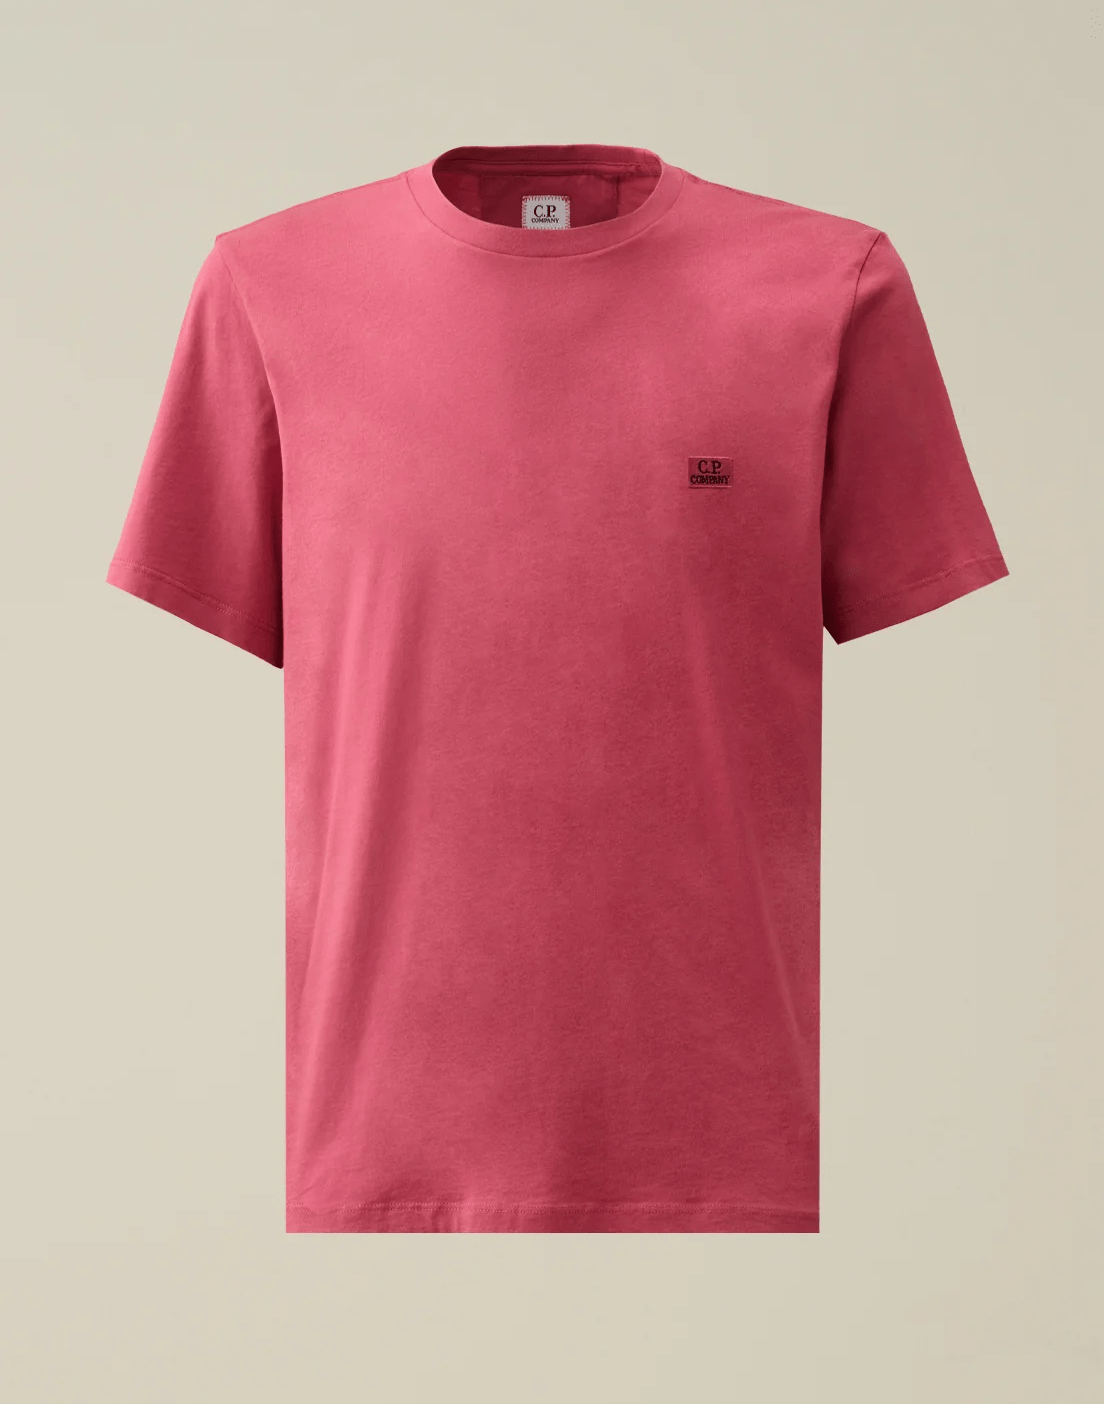 C.P Company - T-shirt Red bud 30/1 Jersey - Lothaire